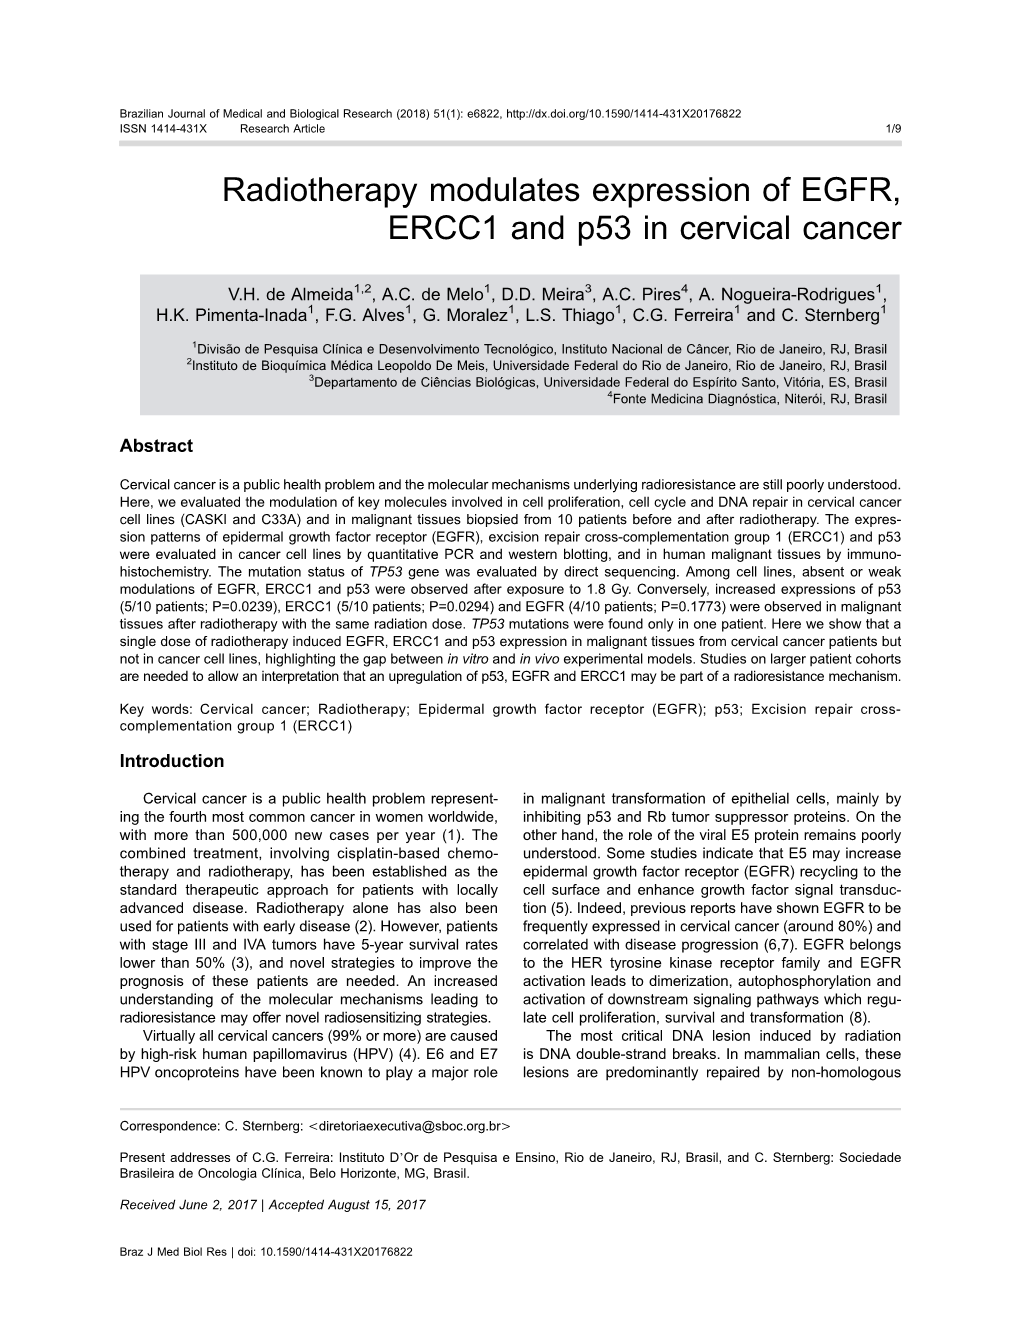 Radiotherapy Modulates Expression of EGFR, ERCC1 and P53 in Cervical Cancer